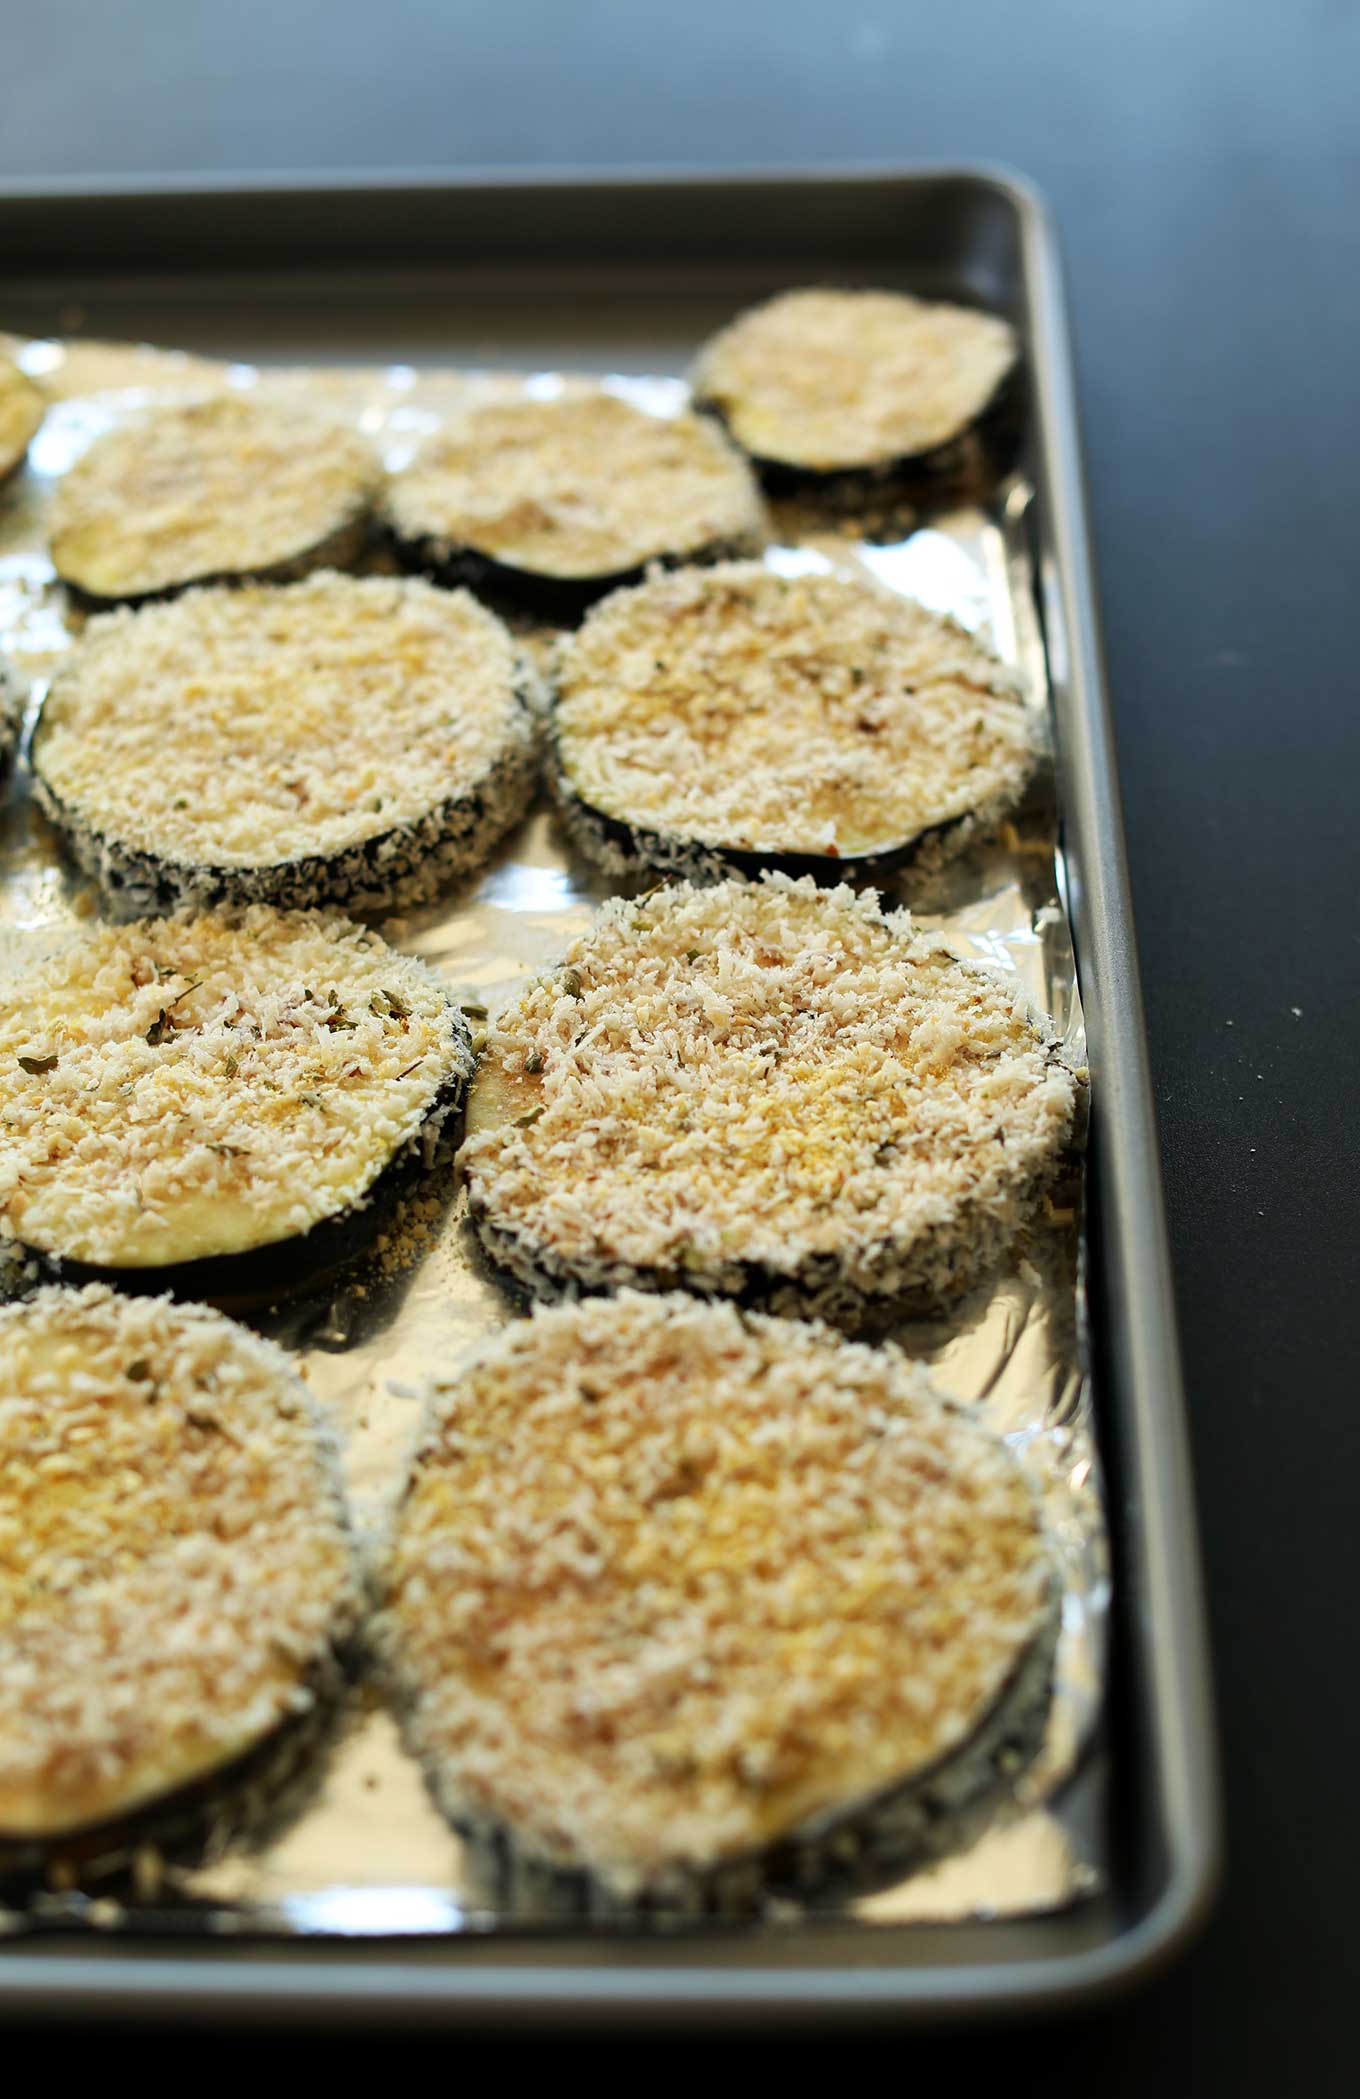 Breaded eggplant slices on a baking sheet for making our vegan eggplant parmesan recipe